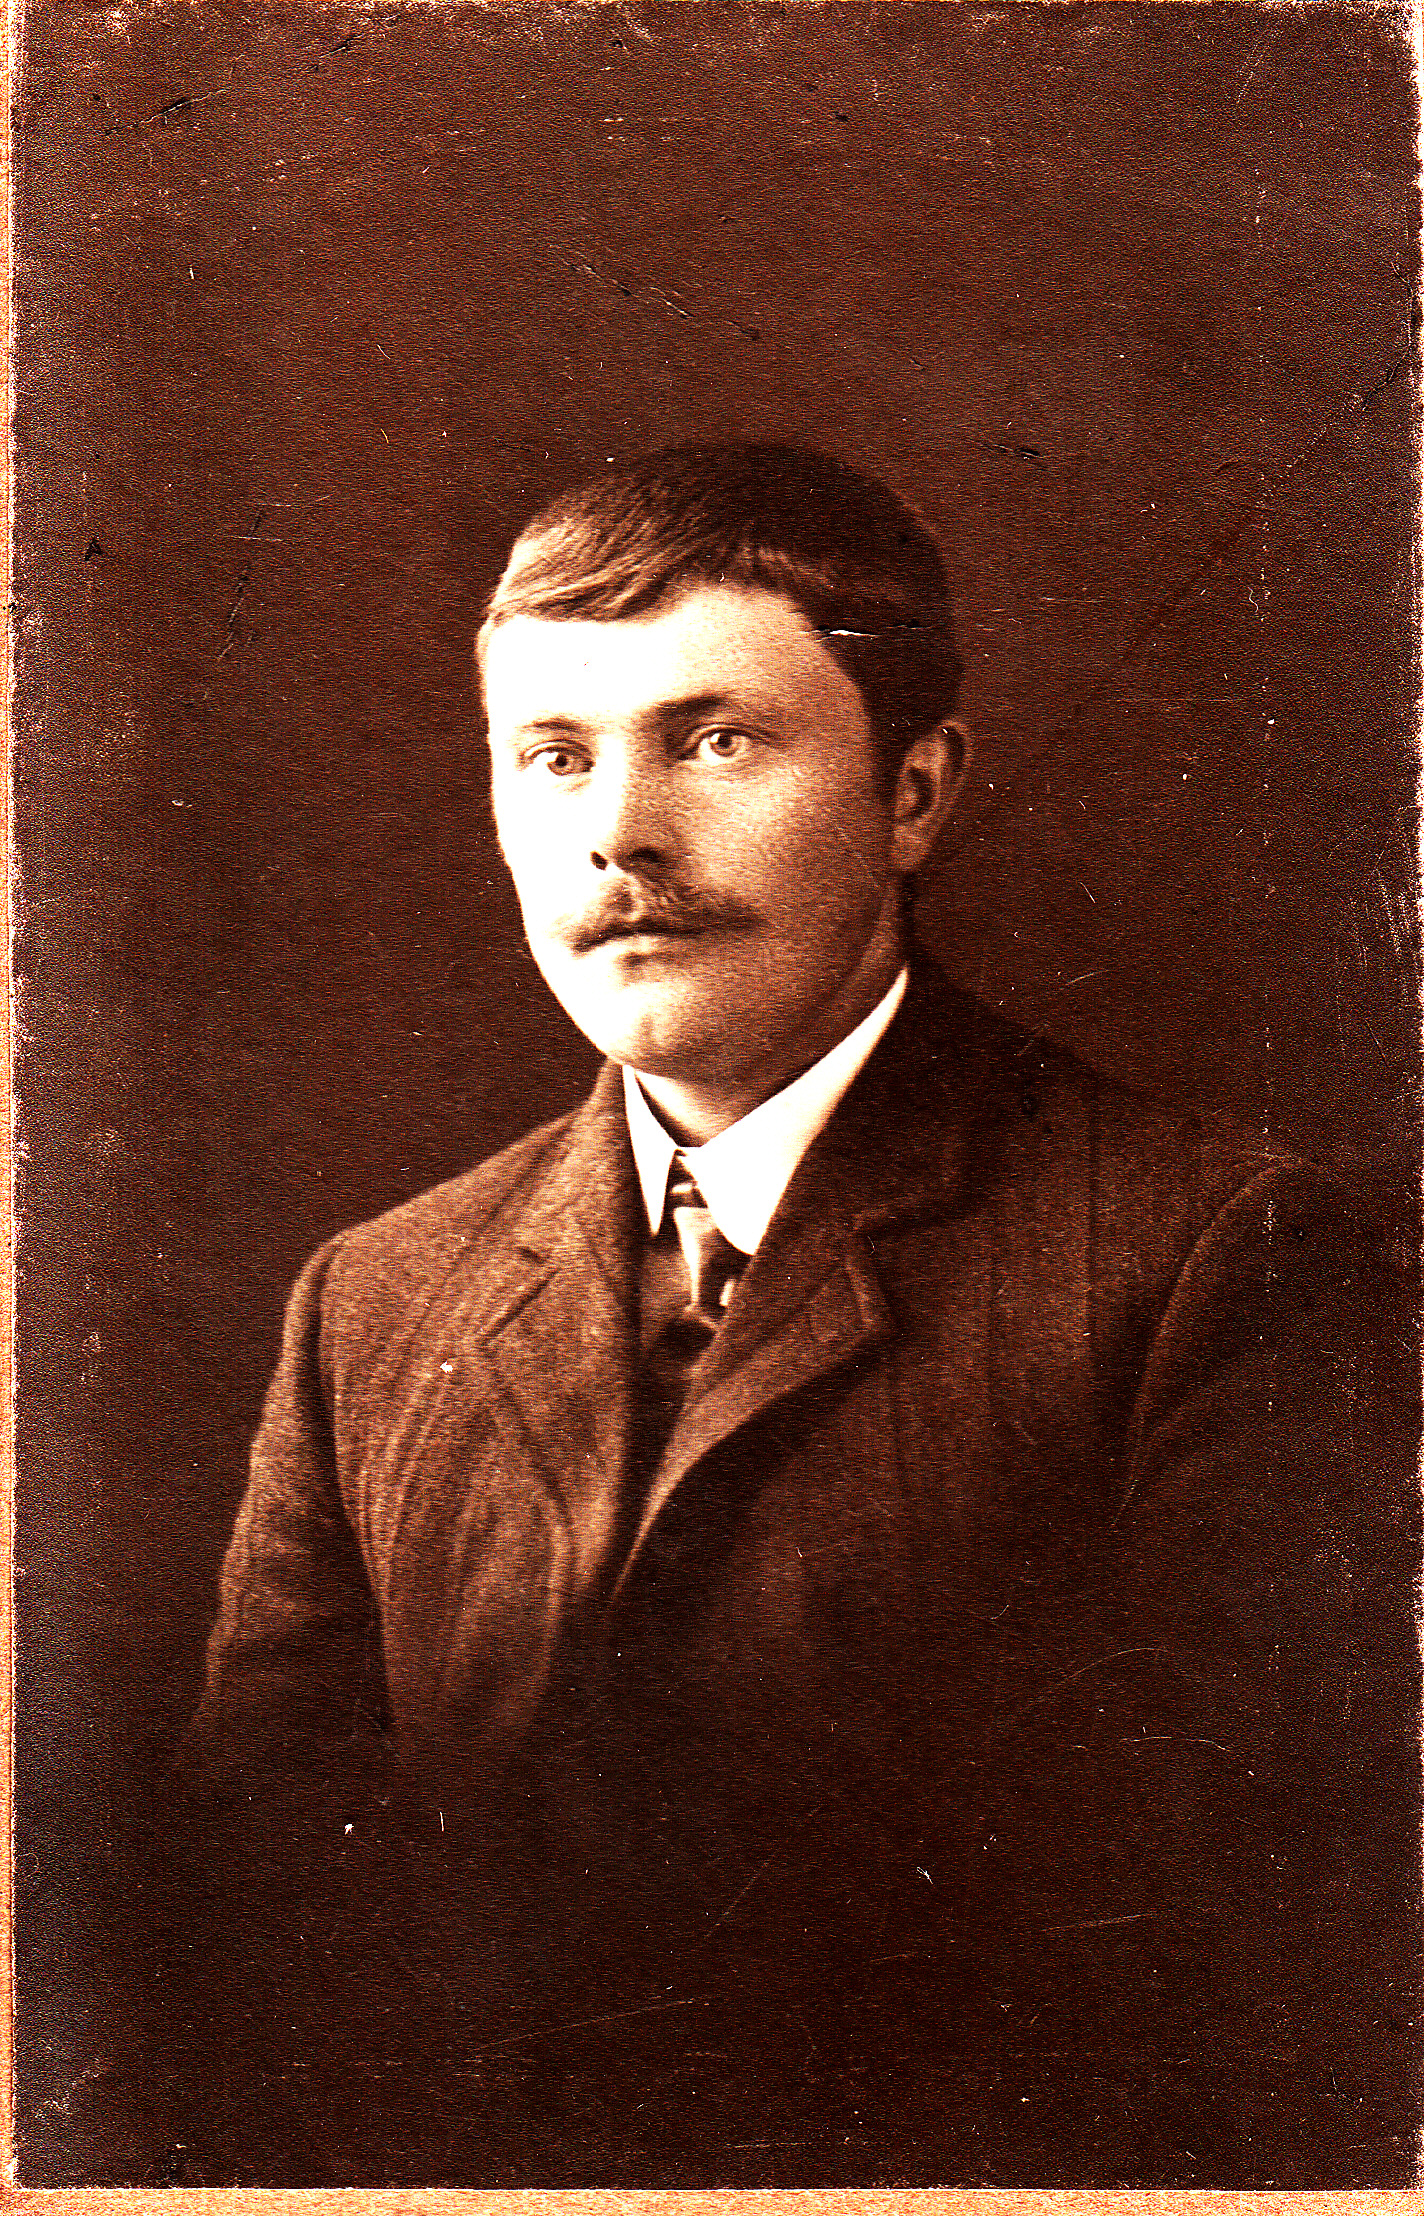 a vintage po of a man wearing a suit and tie